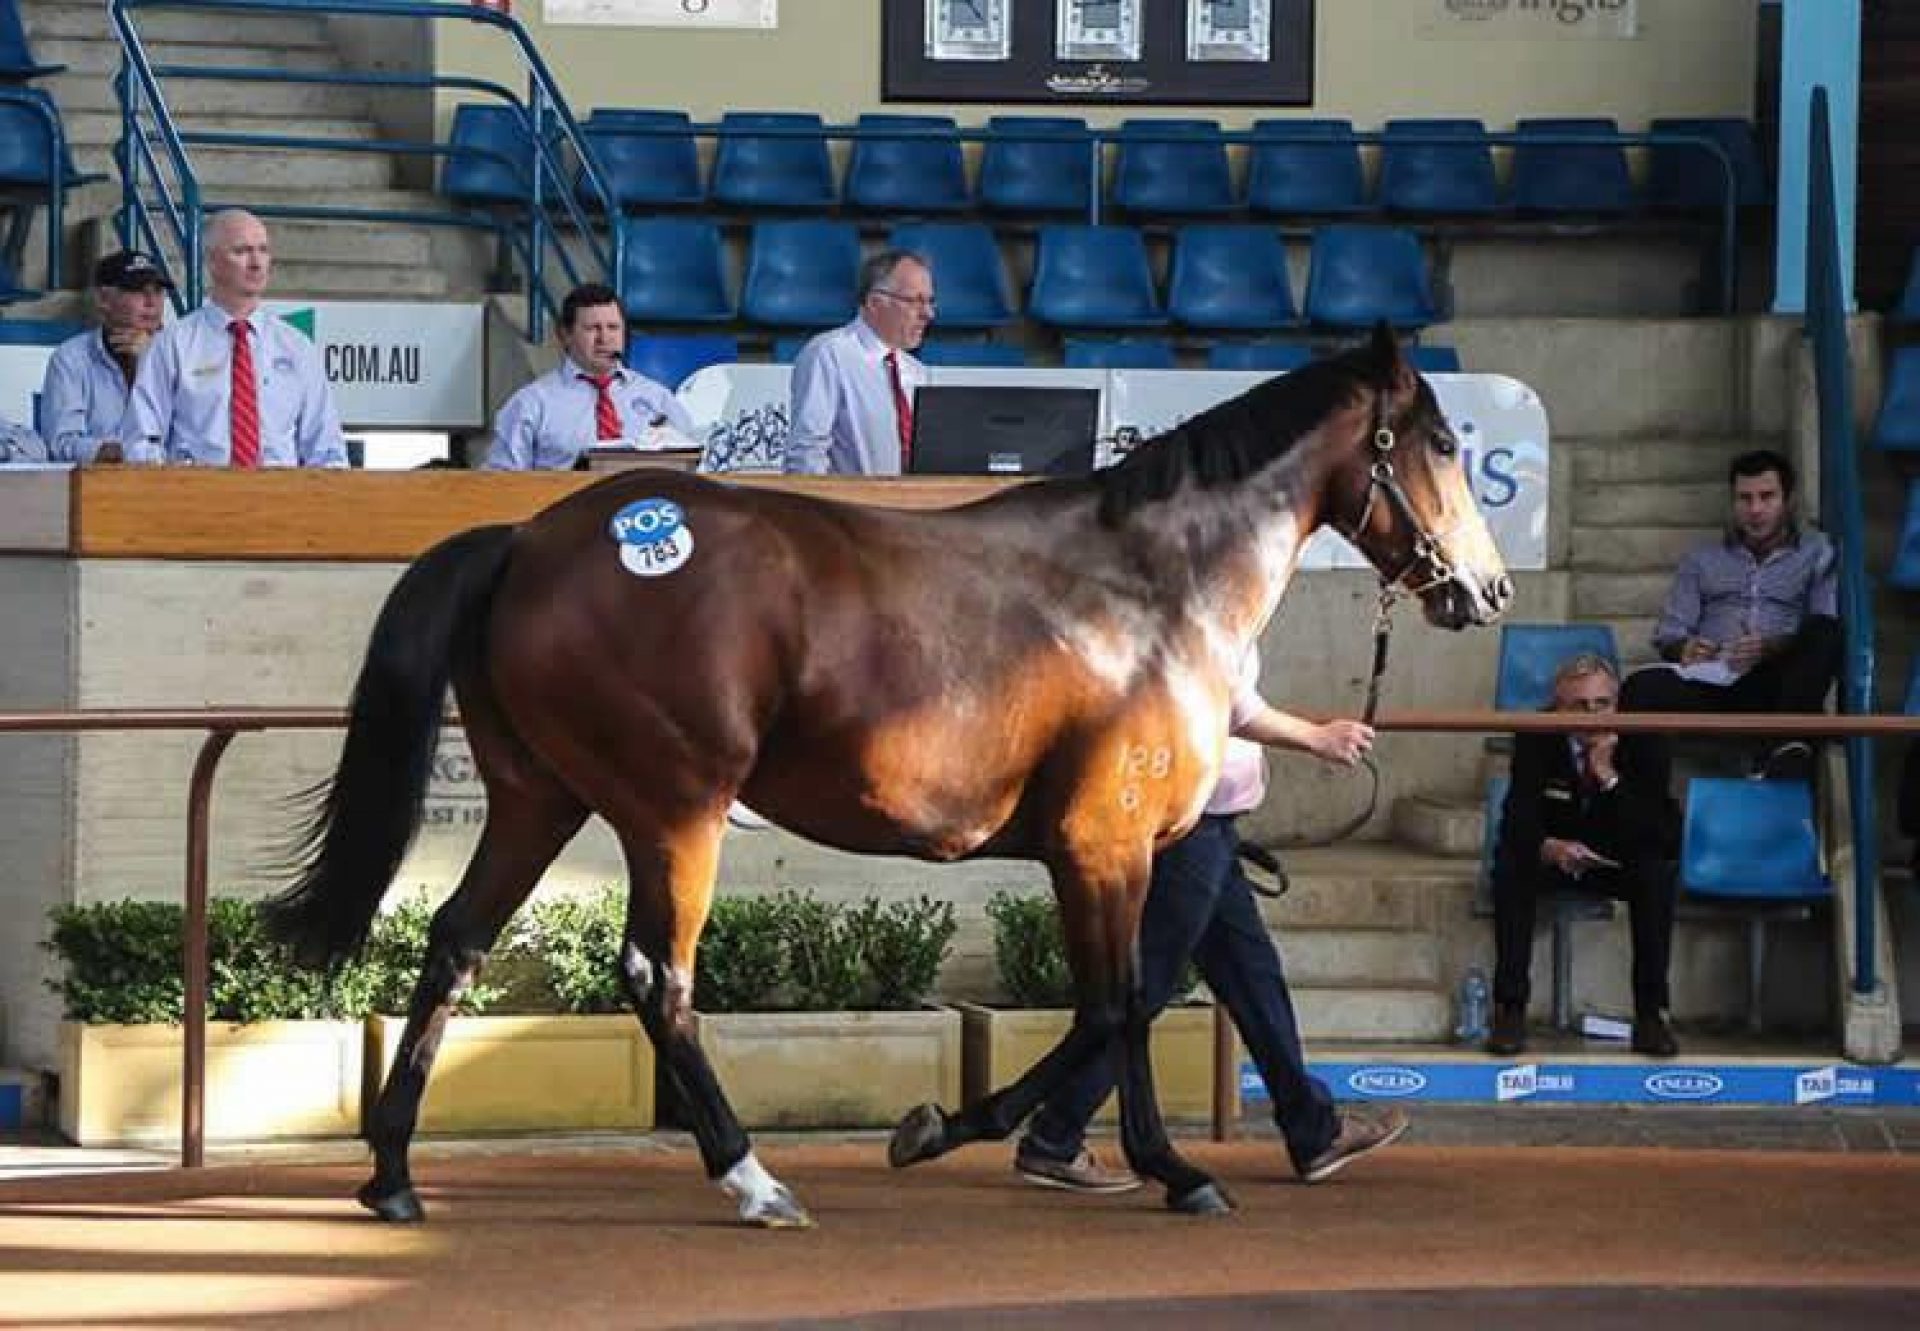 Haiku selling for $580,000at Inglis, set to be covered by Vancouver